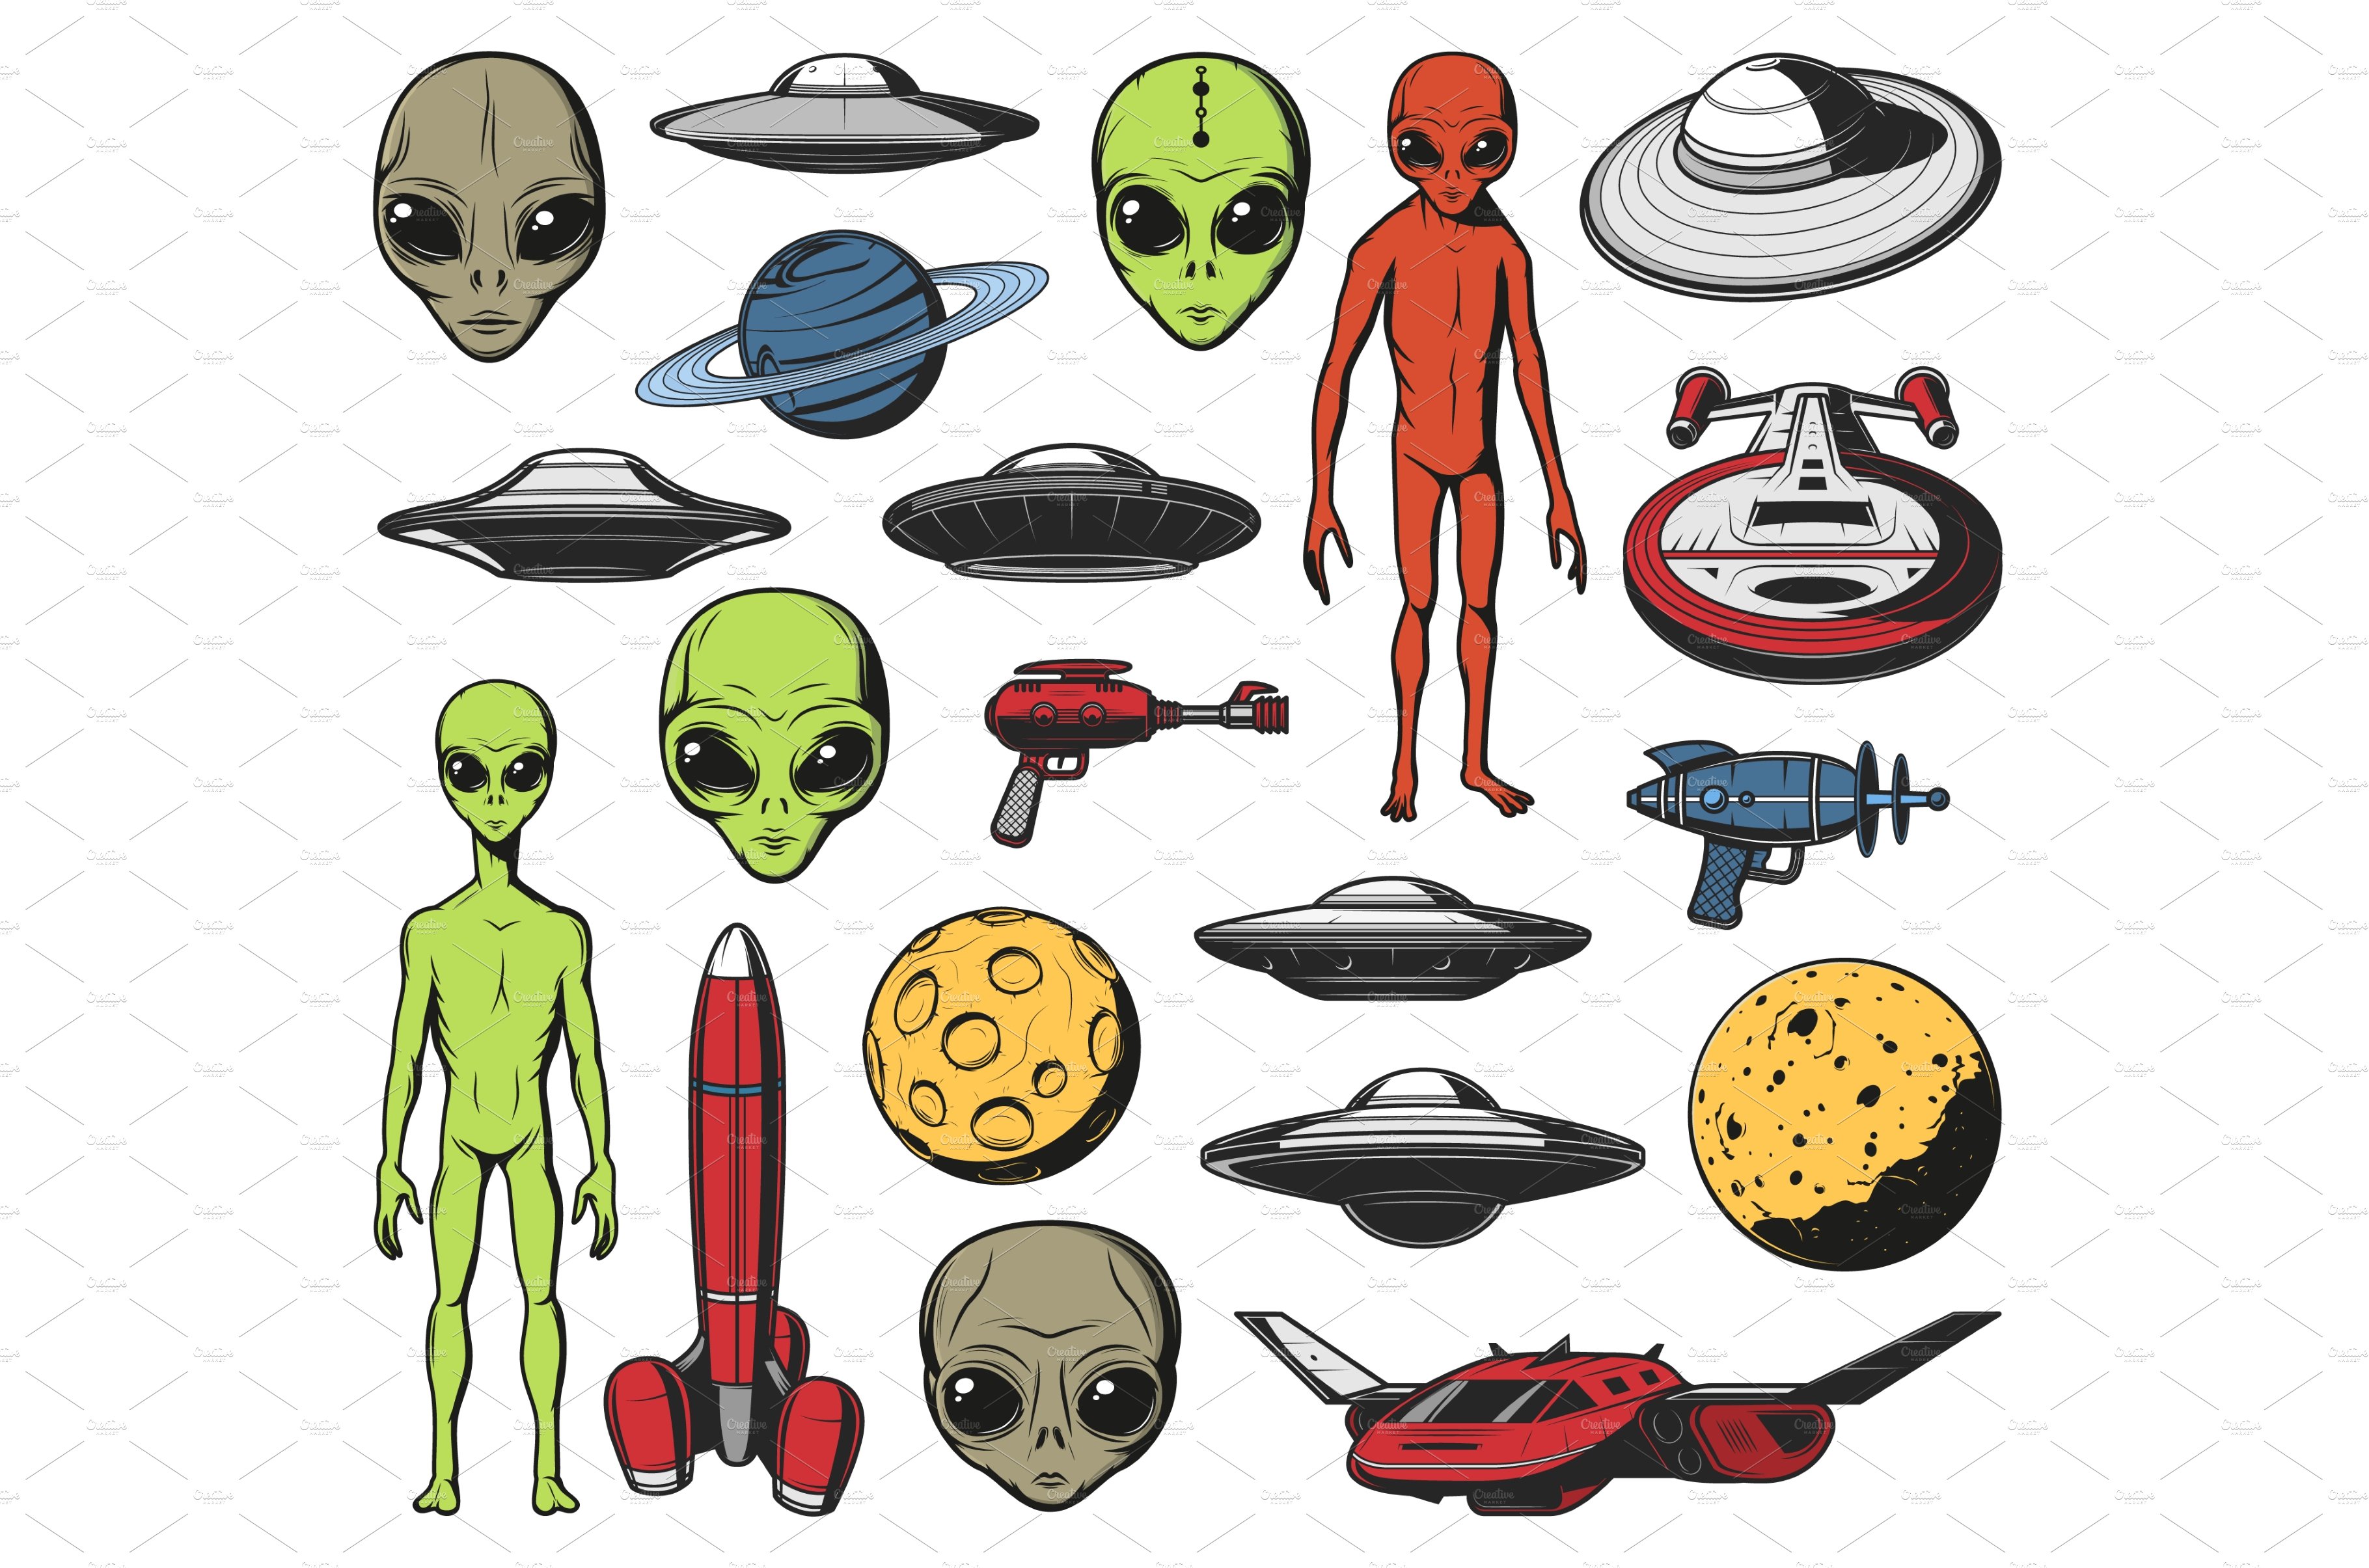 Aliens, ufo and space shuttles cover image.